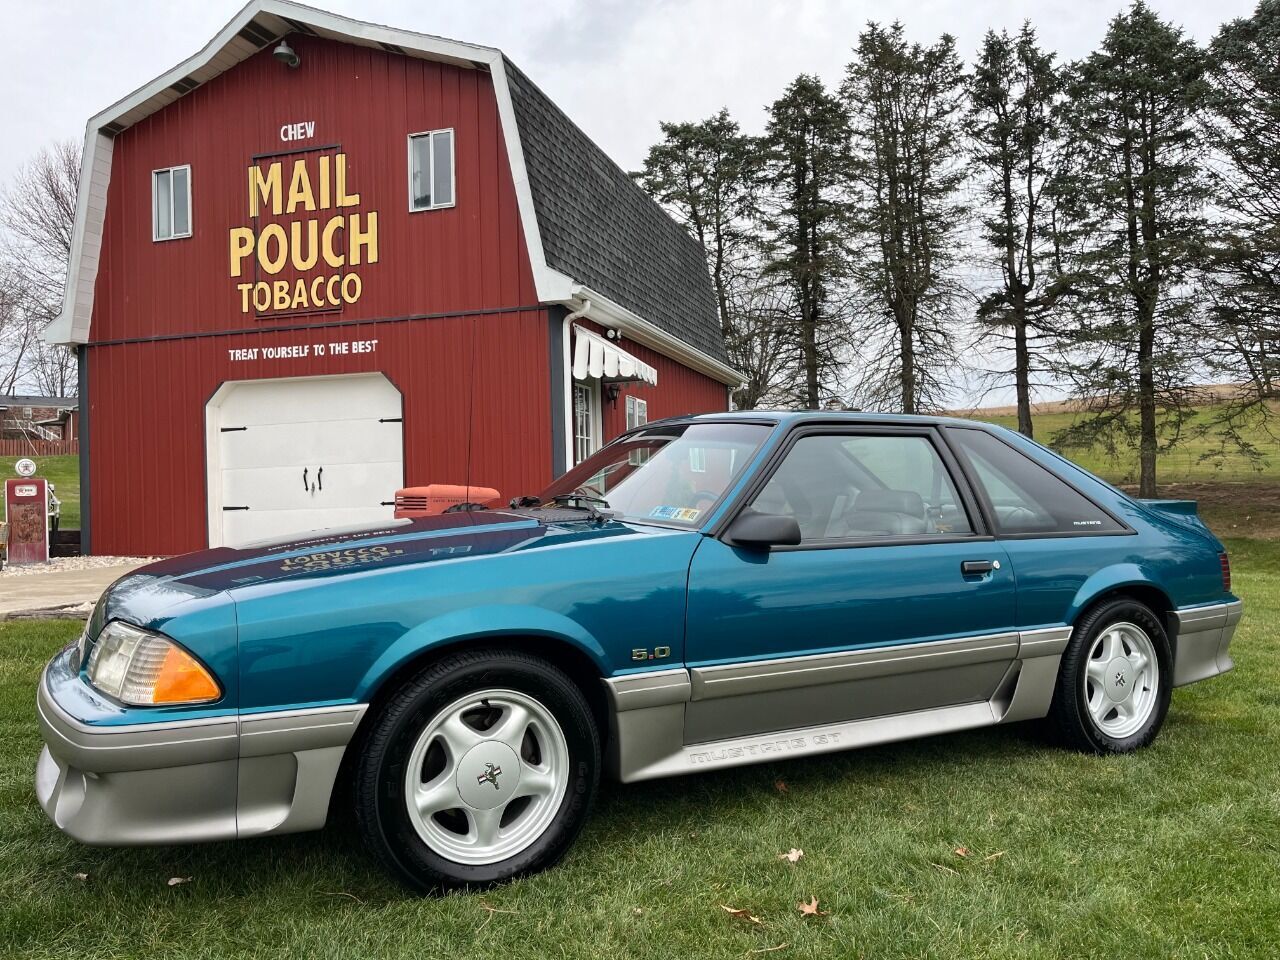 1993 Ford Mustang For Sale In Baton Rouge, LA - Carsforsale.com®